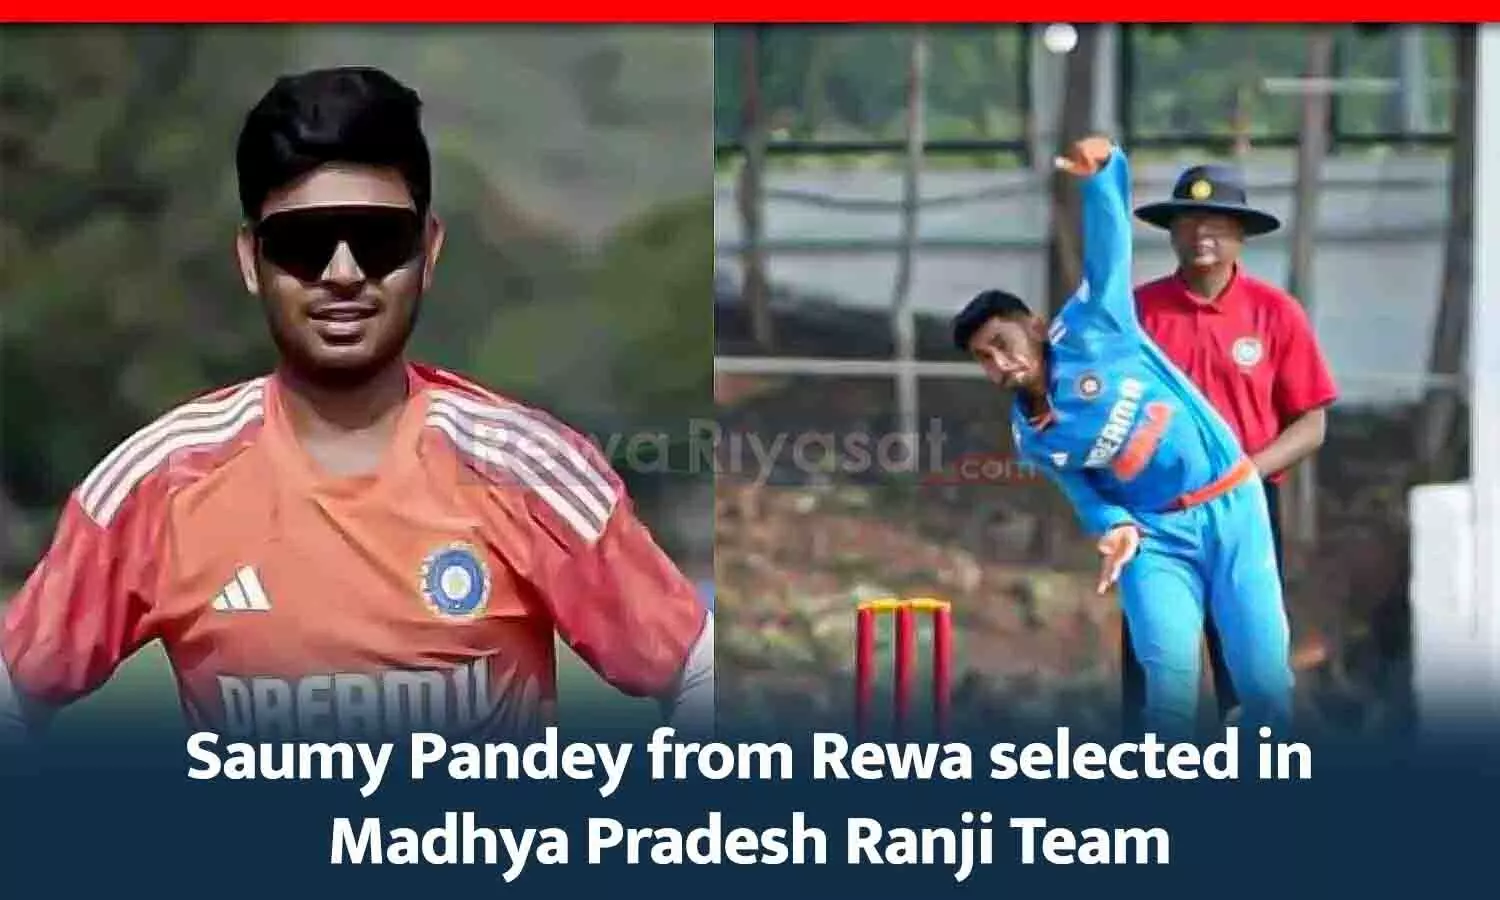 Saumy Pandey from Rewa selected in Madhya Pradesh Ranji Team, Was the Vice-Captain of Team India in U-19 World Cup